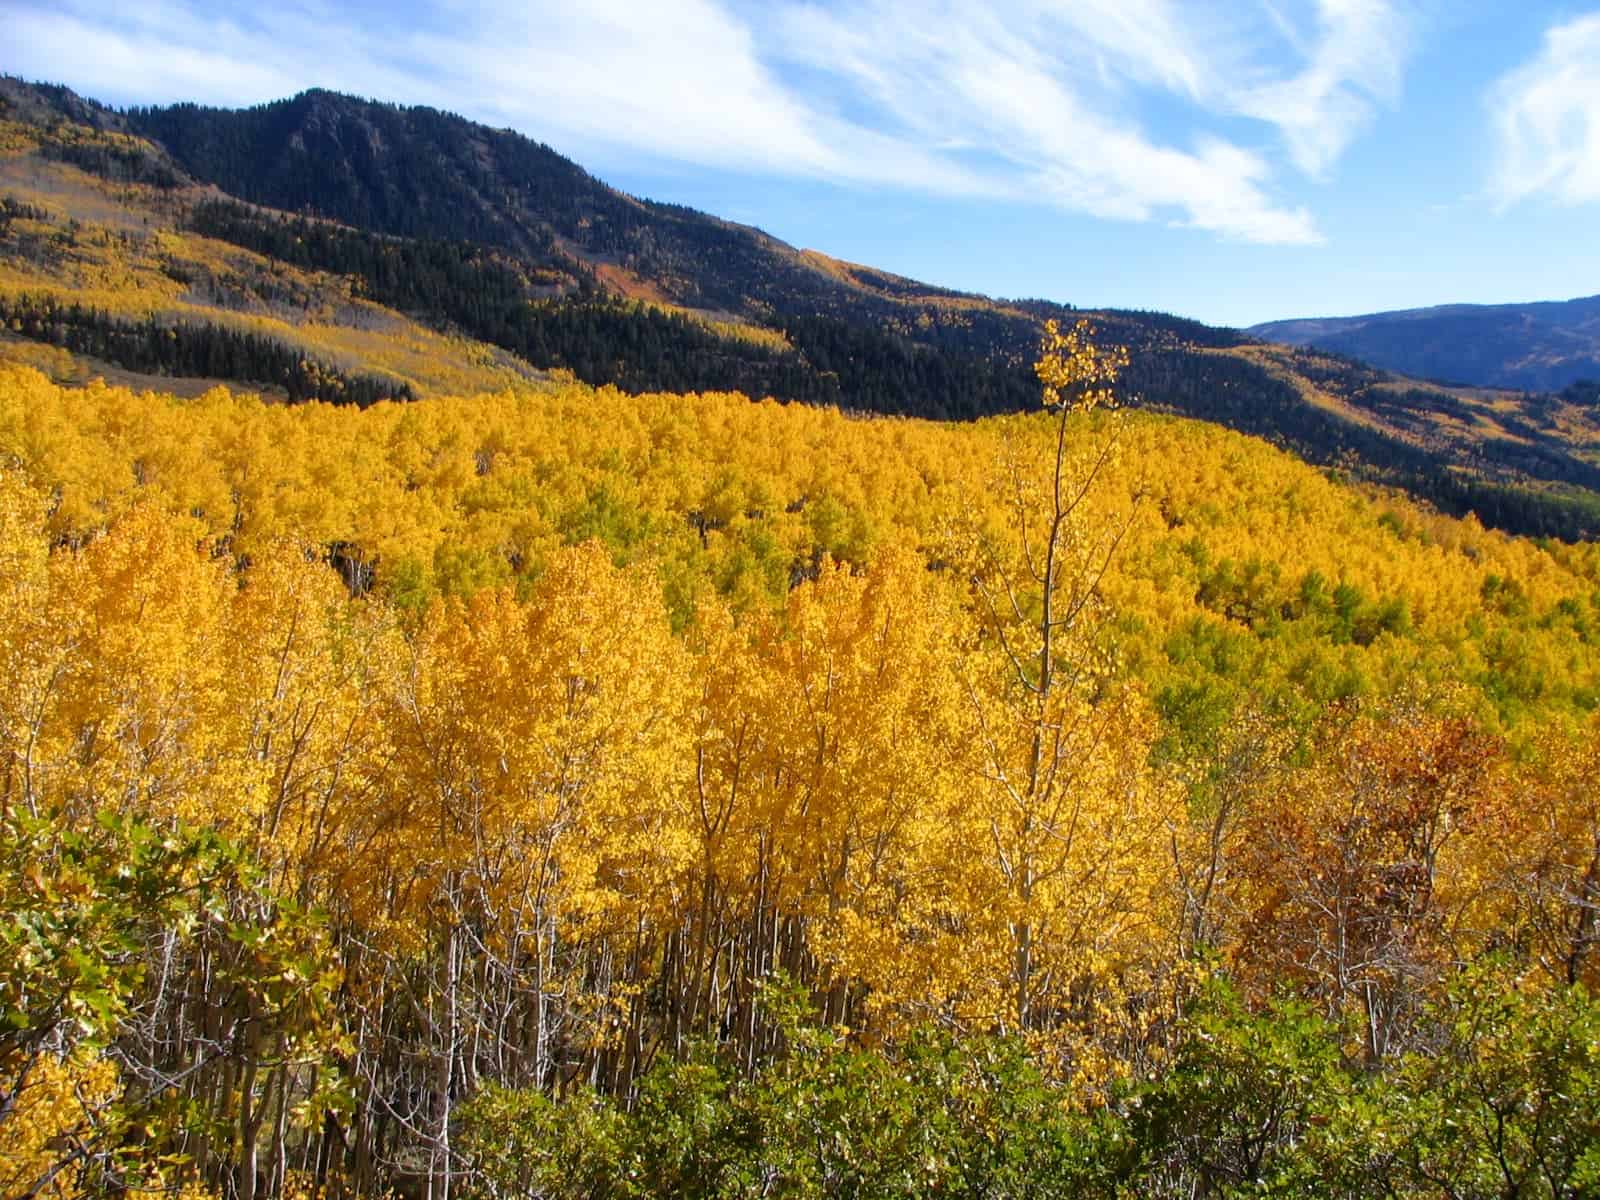 Pando is one of the largest, oldest living organisms in the world. Image credits: Mark Muir.